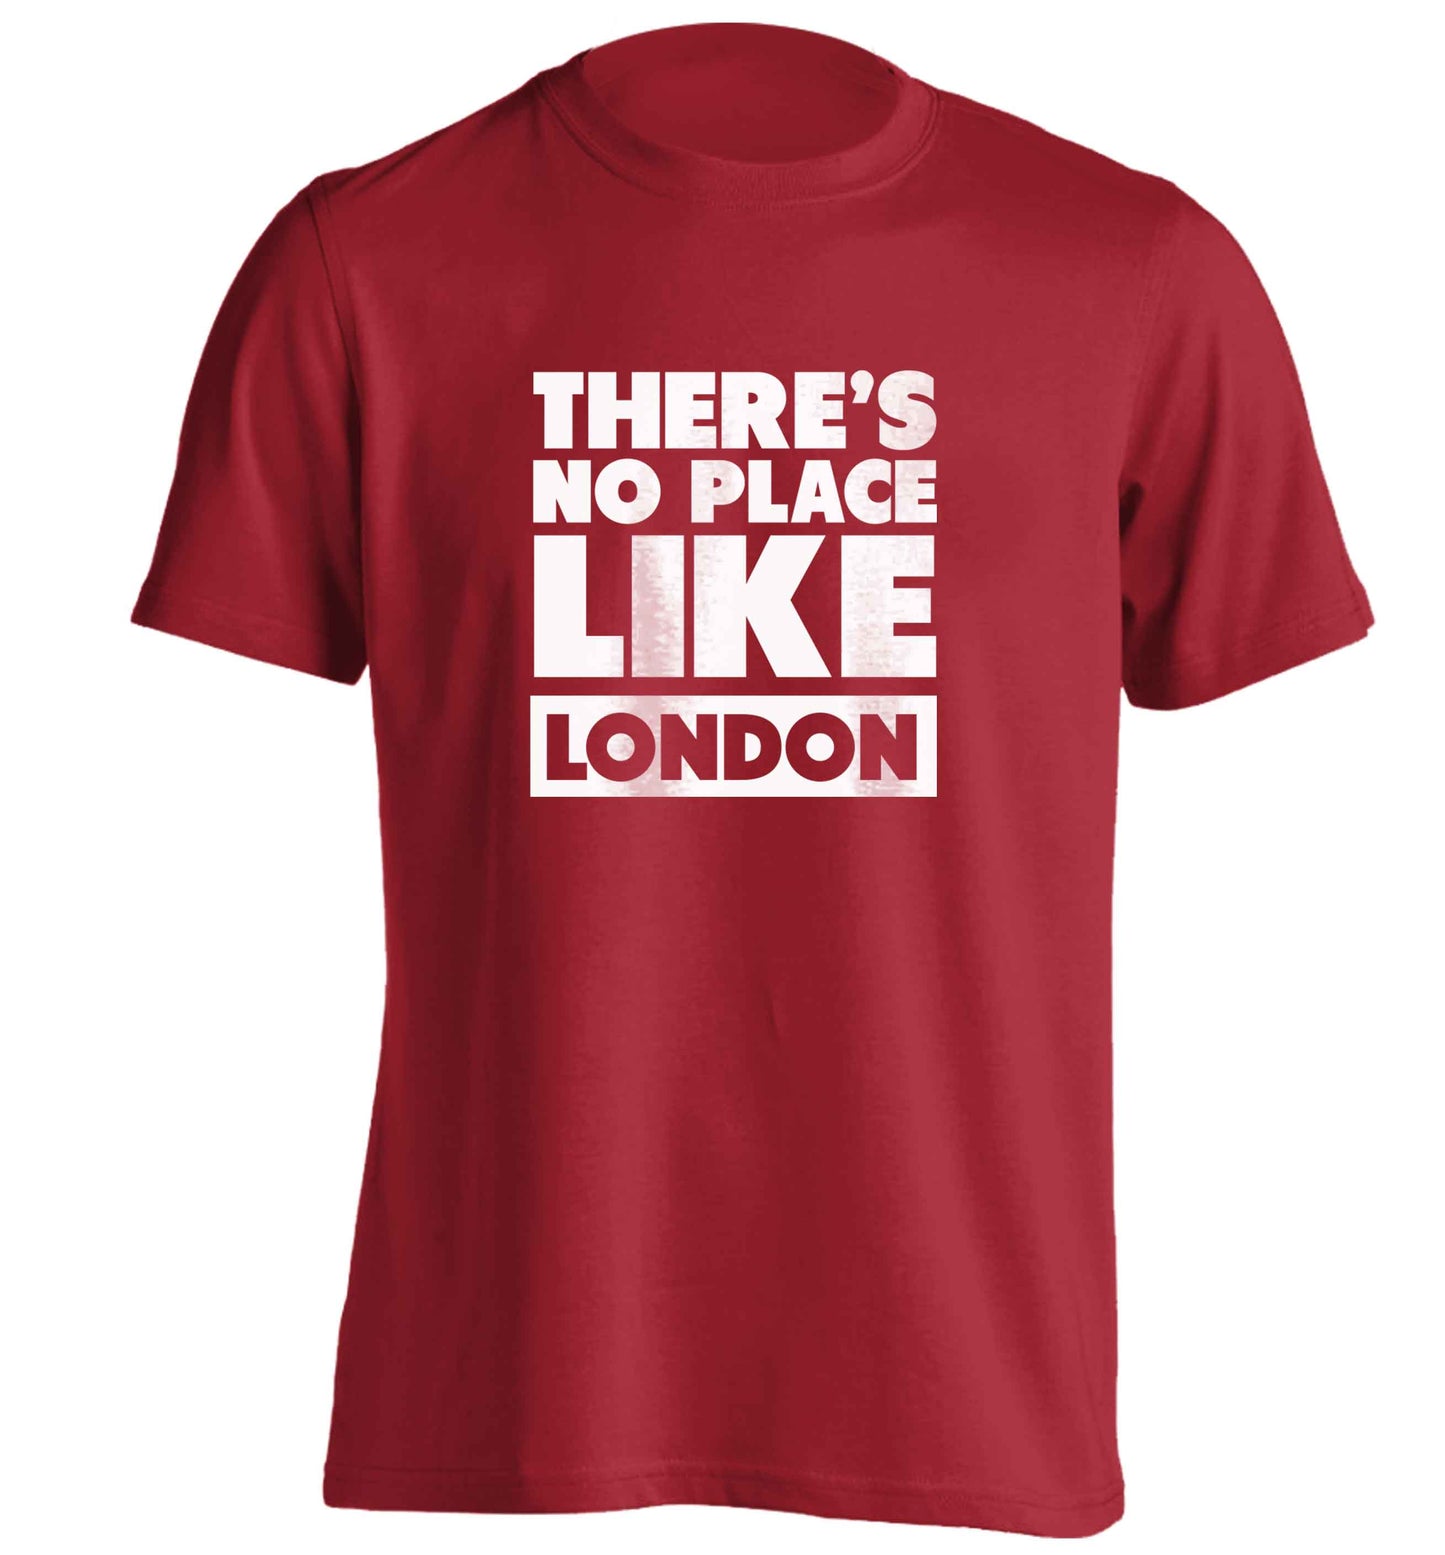 There's no place like England adults unisex red Tshirt 2XL